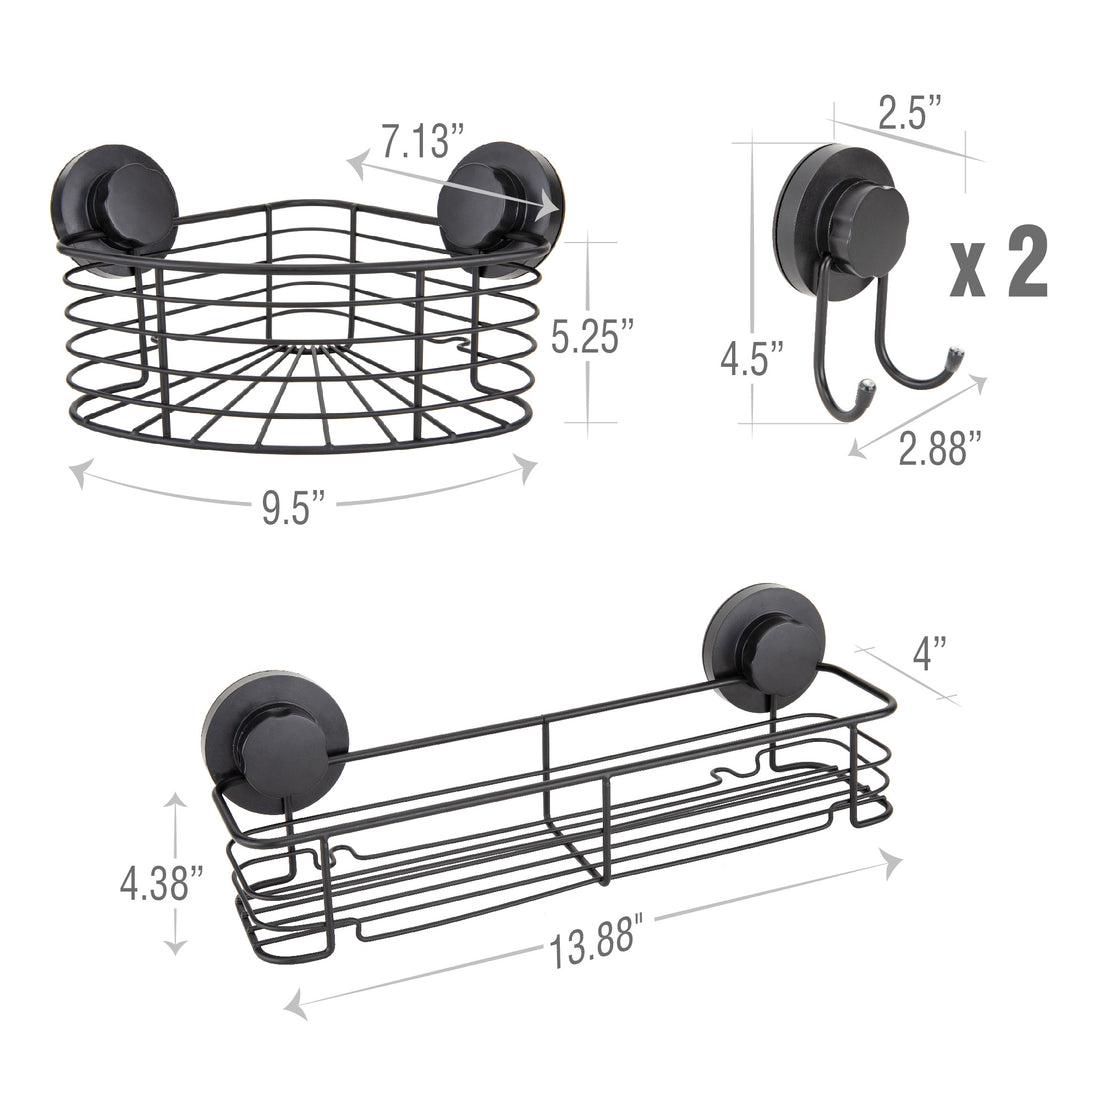 Suction Cup Shower Corner Caddy, Rectangular Suction Cup Shower